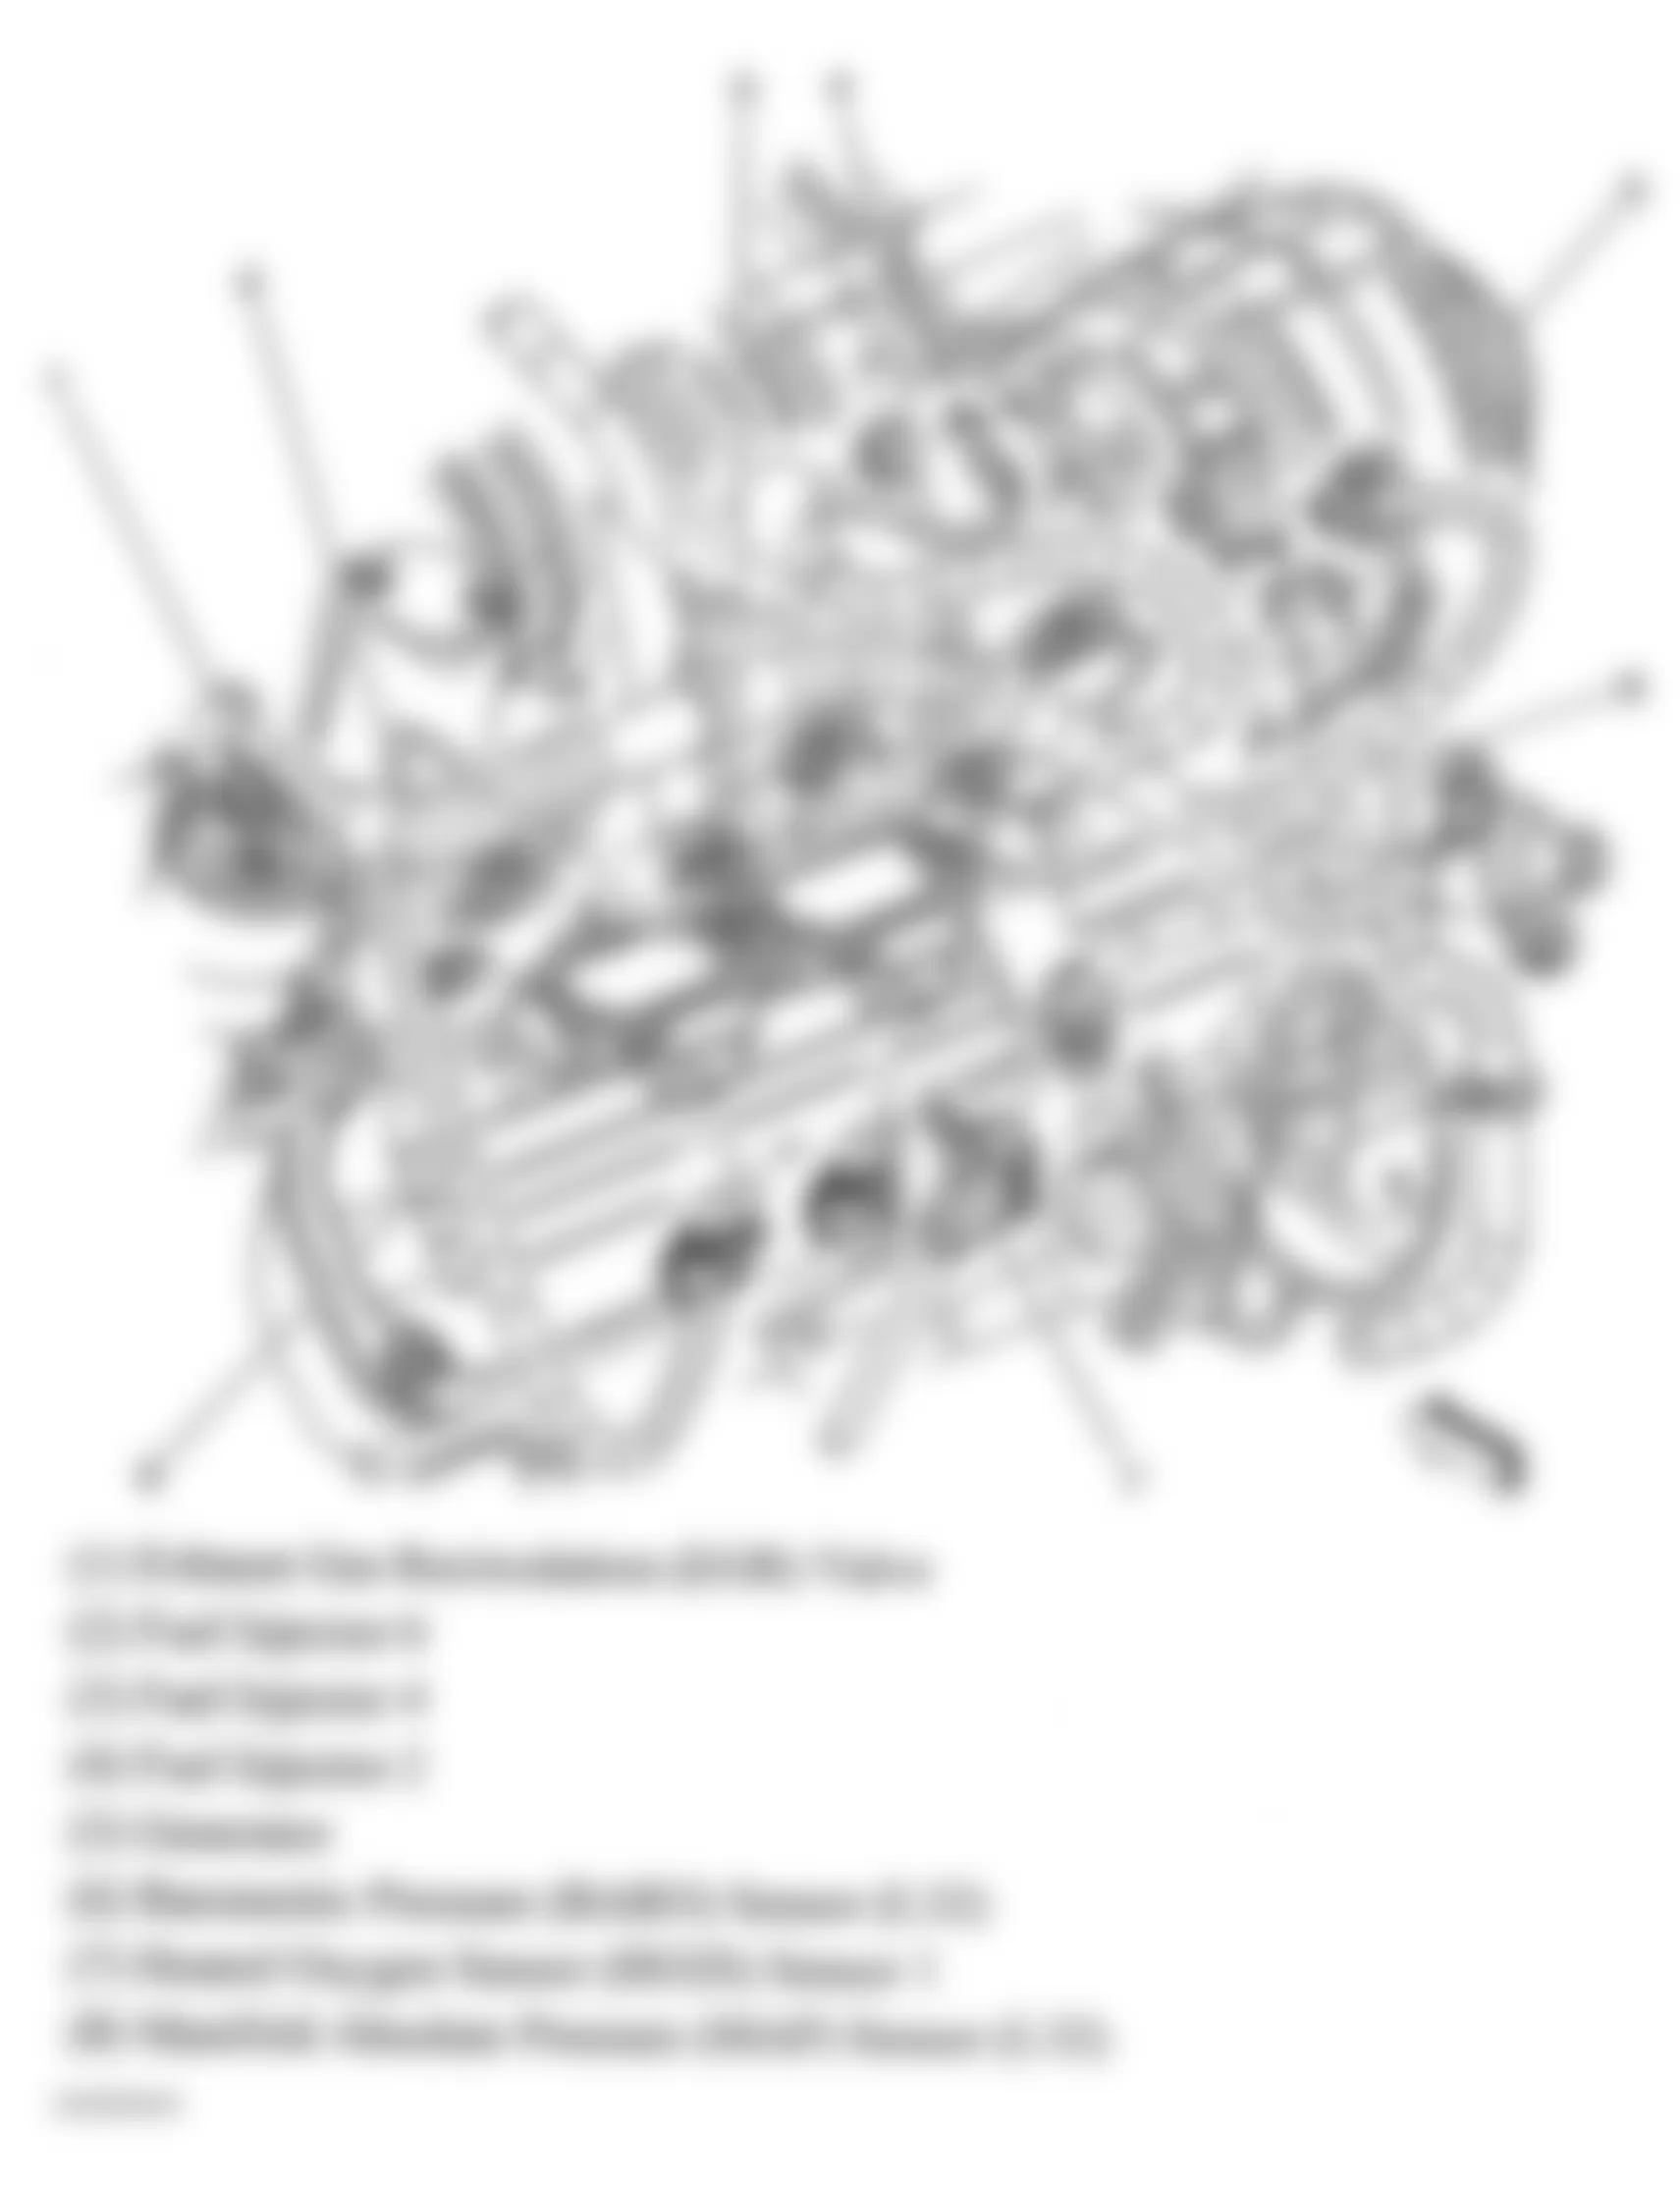 Buick Allure CXL 2005 - Component Locations -  Left Rear Of Engine (3.8L)